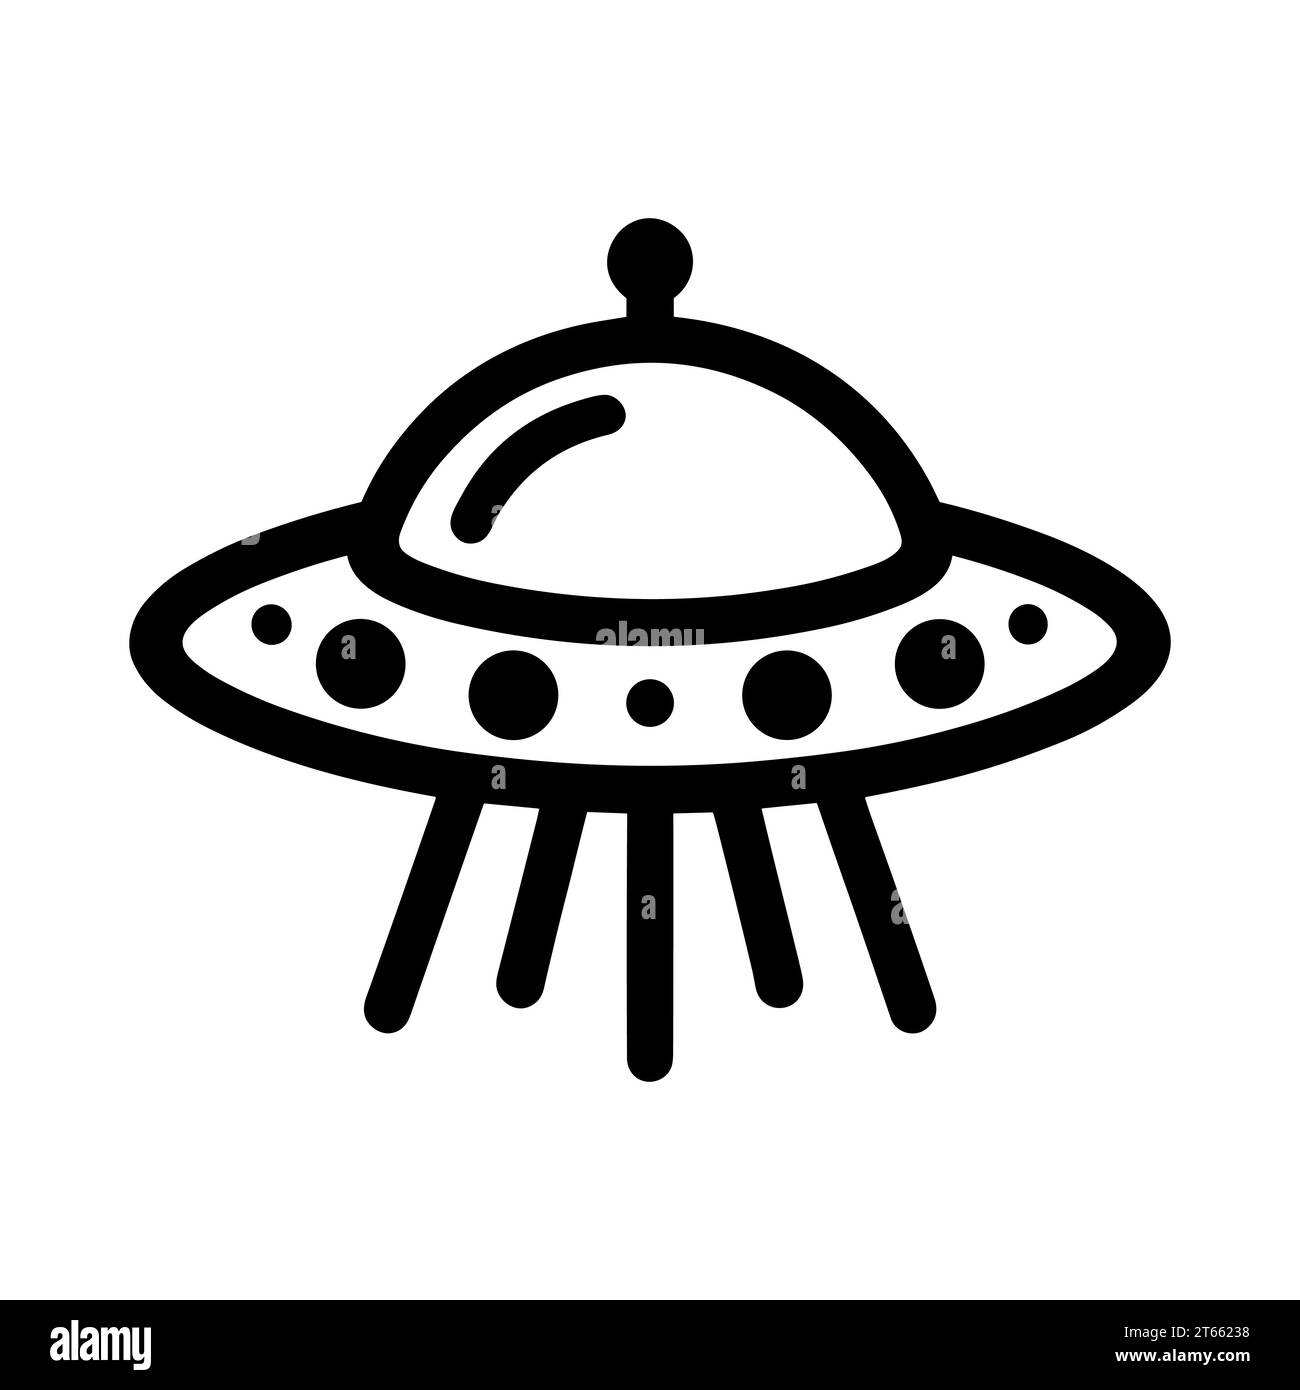 UFO icon. Flying saucer icon. Black illustration of a UFO with a descending light beams. Concept of extraterrestrial technology Stock Vector